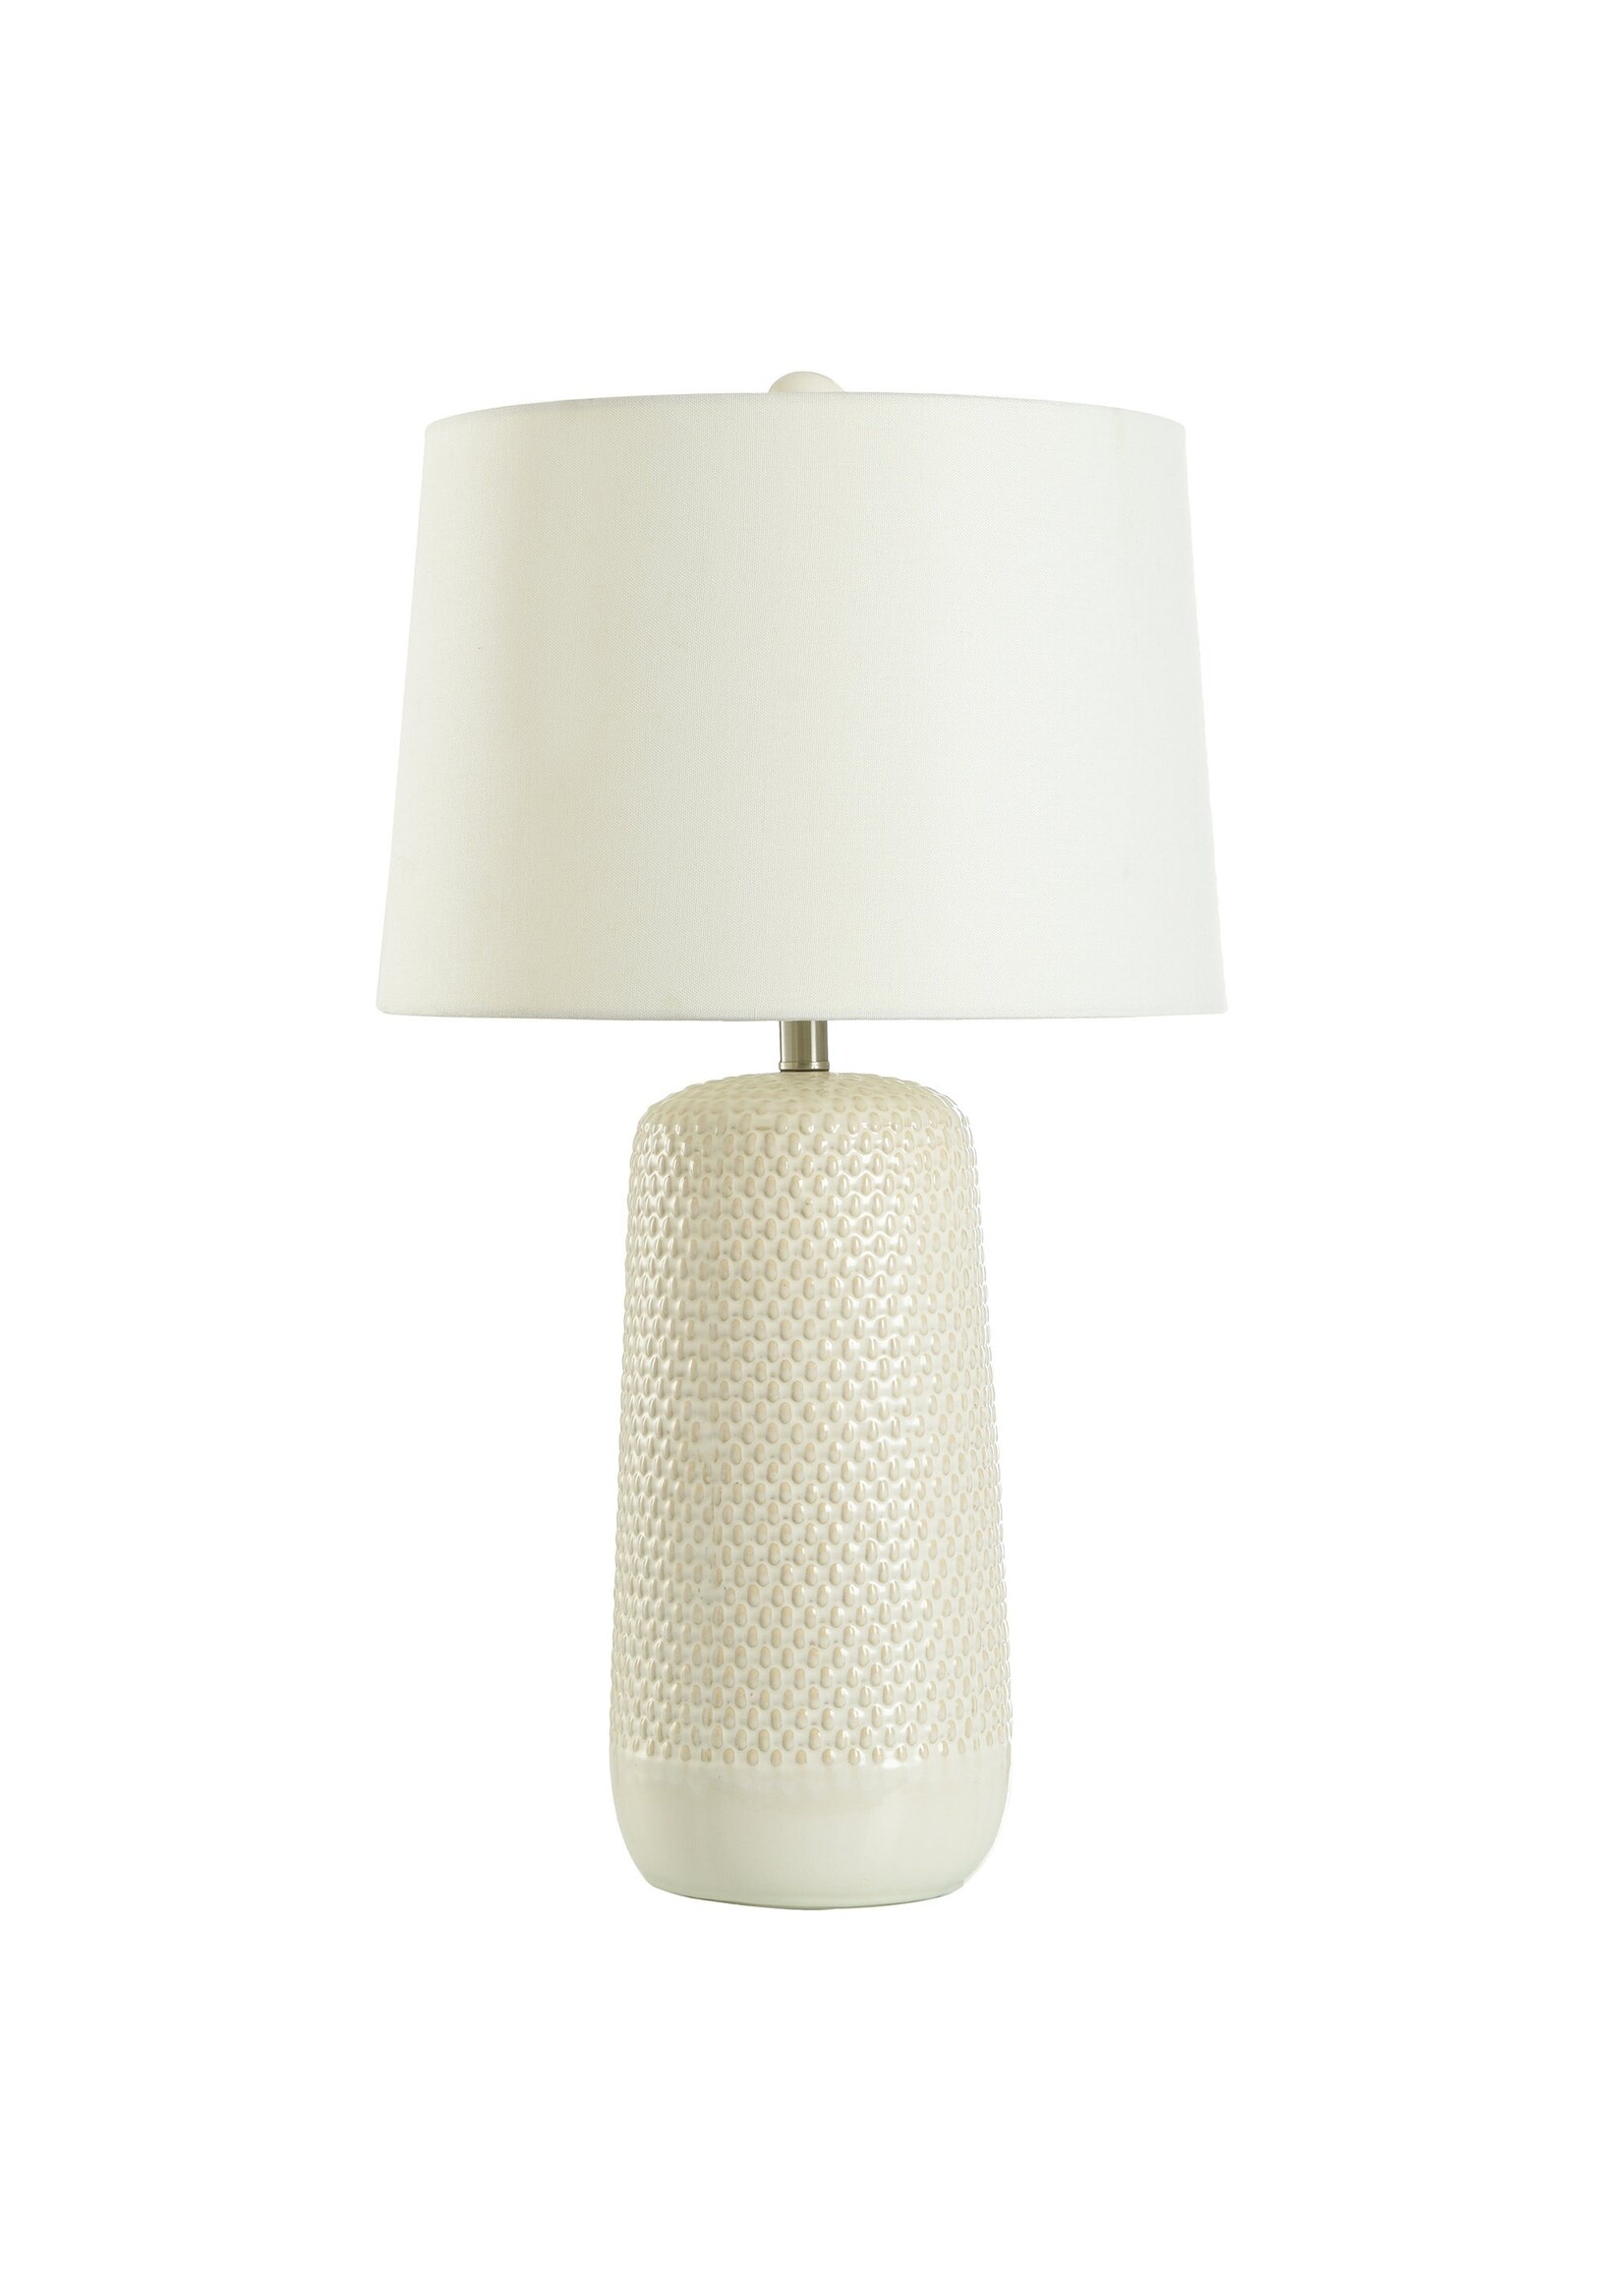 Style Craft 30in Subtle Ceramic Body with Woven Wicker Textured Design Table Lamp L318125